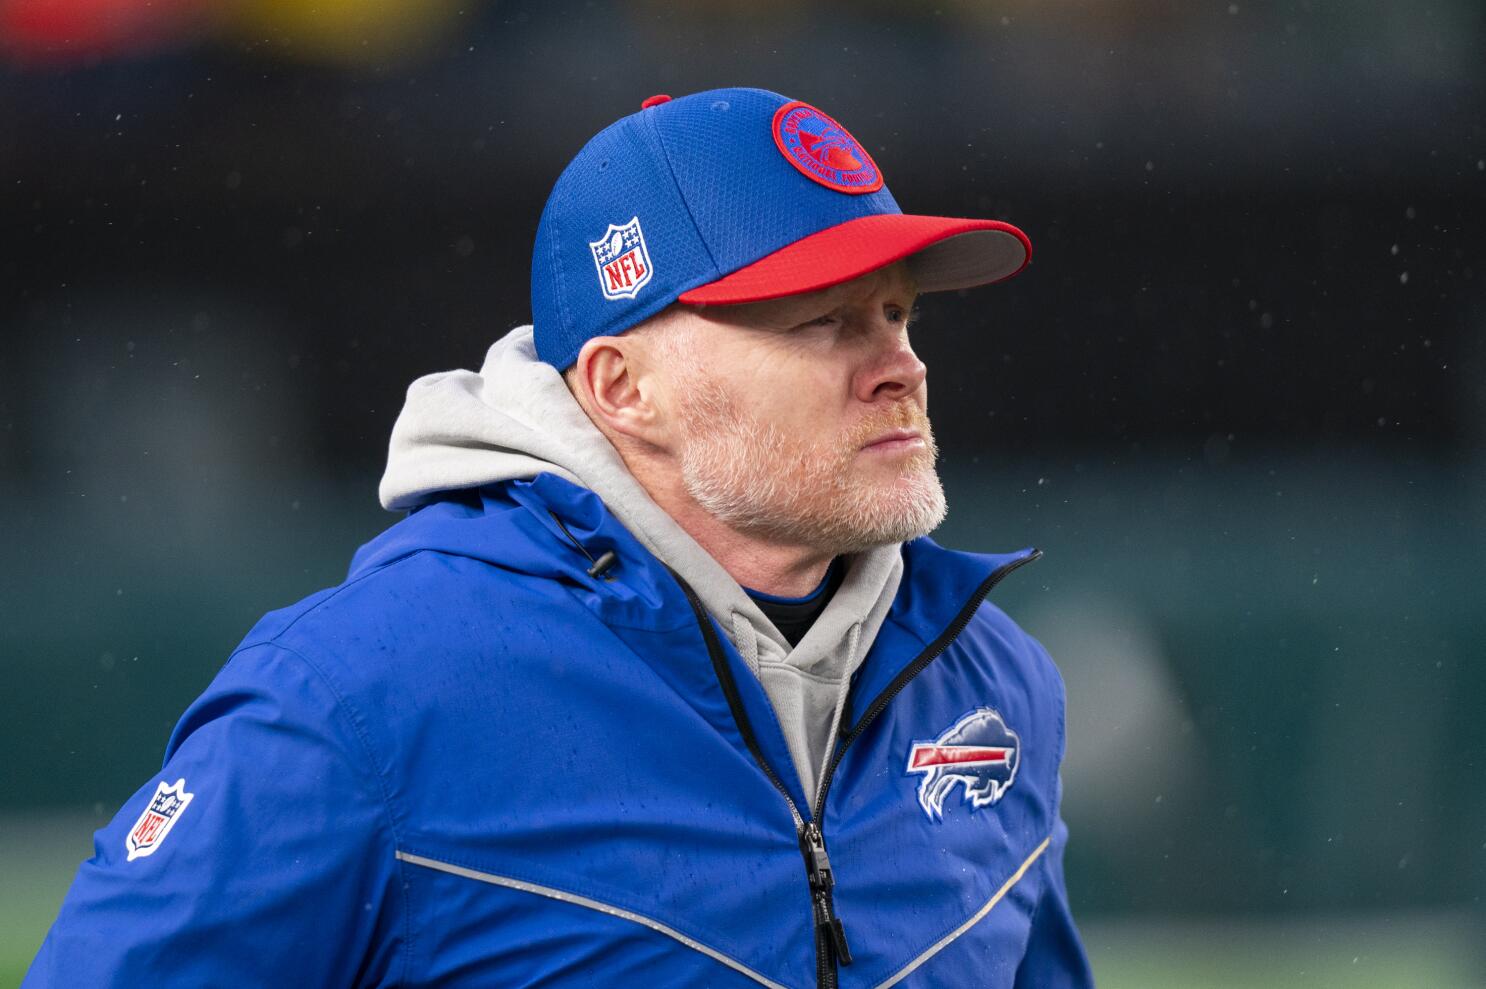 Sean McDermott says Bills players supportive after 9/11 comments - Los Angeles Times